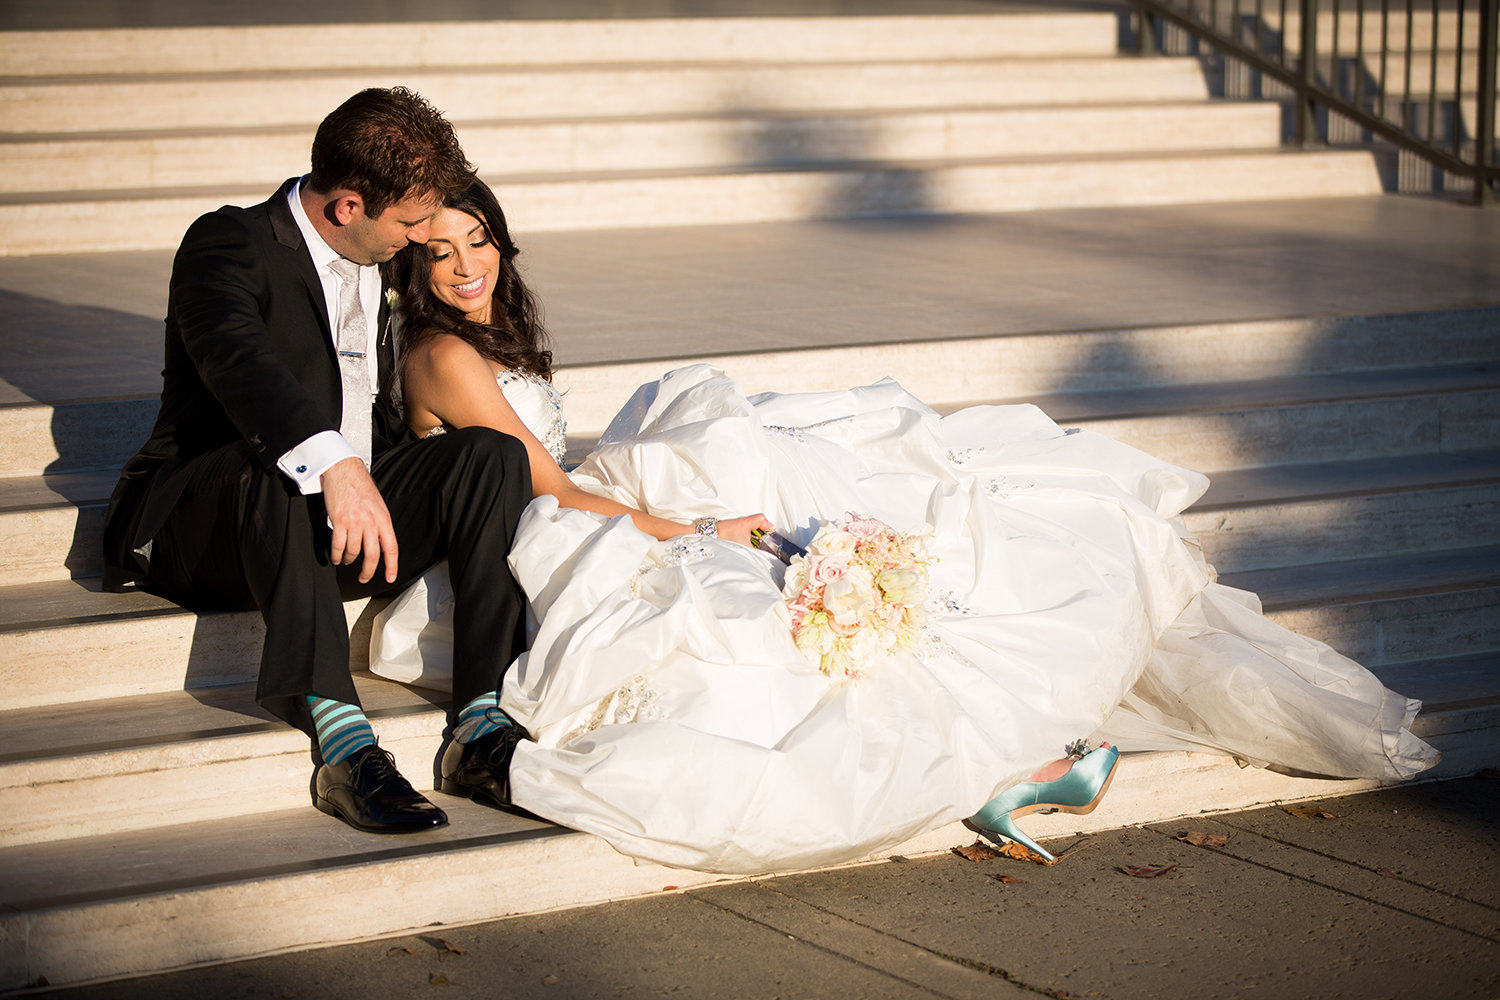 Romantic posing idea for bride and groom with stairs